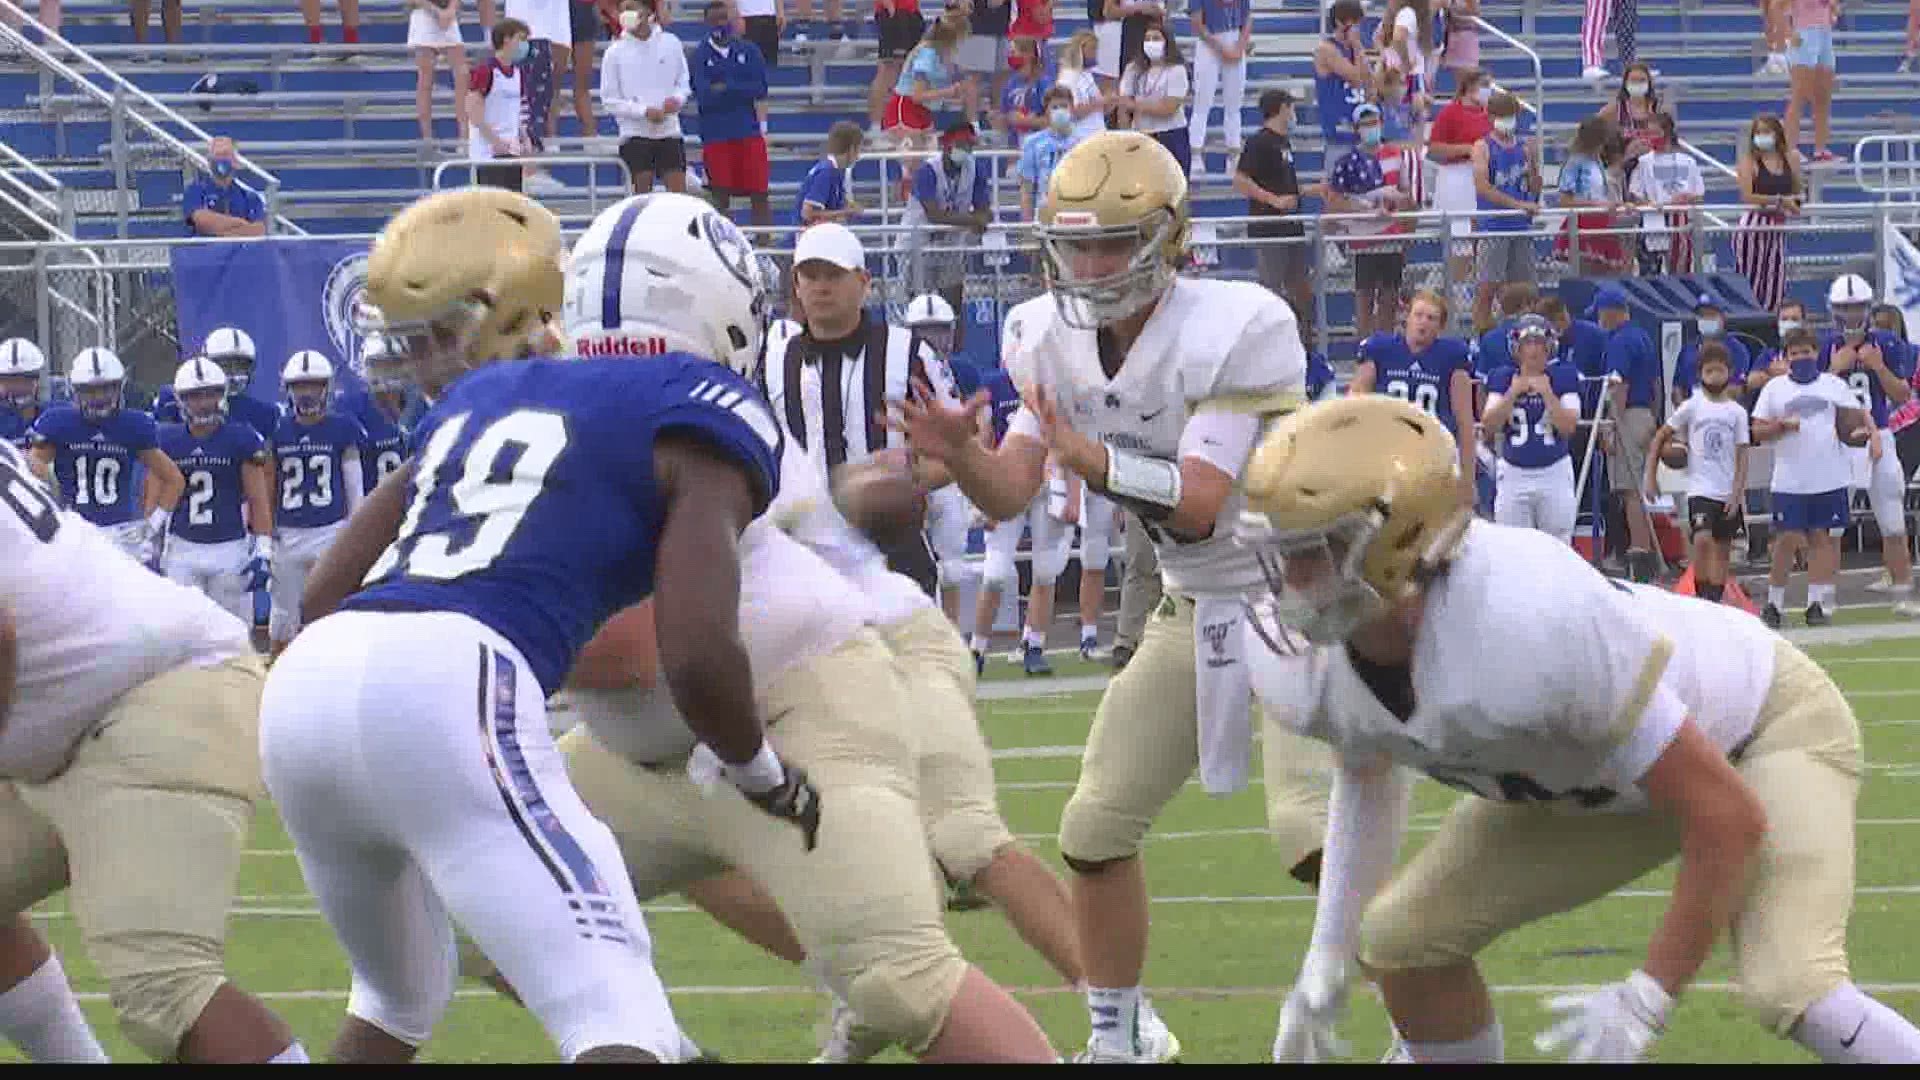 Cathedral faced off with rival Bishop Chatard Friday night on Operation Football.